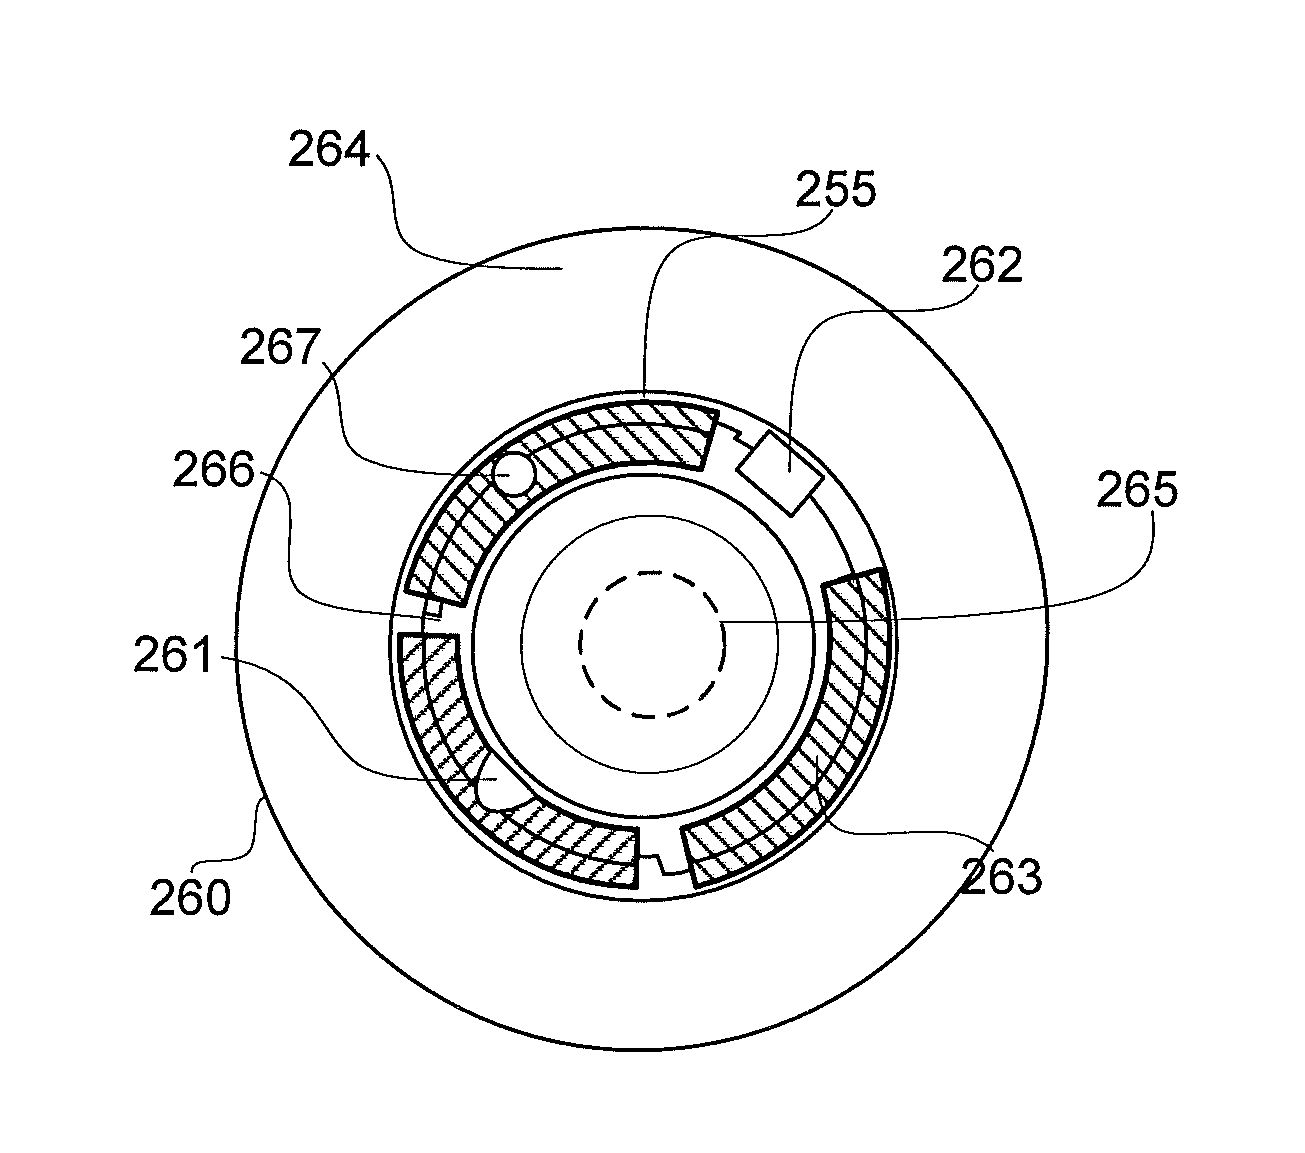 Ophthalmic lens system capable of wireless communication with multiple external devices